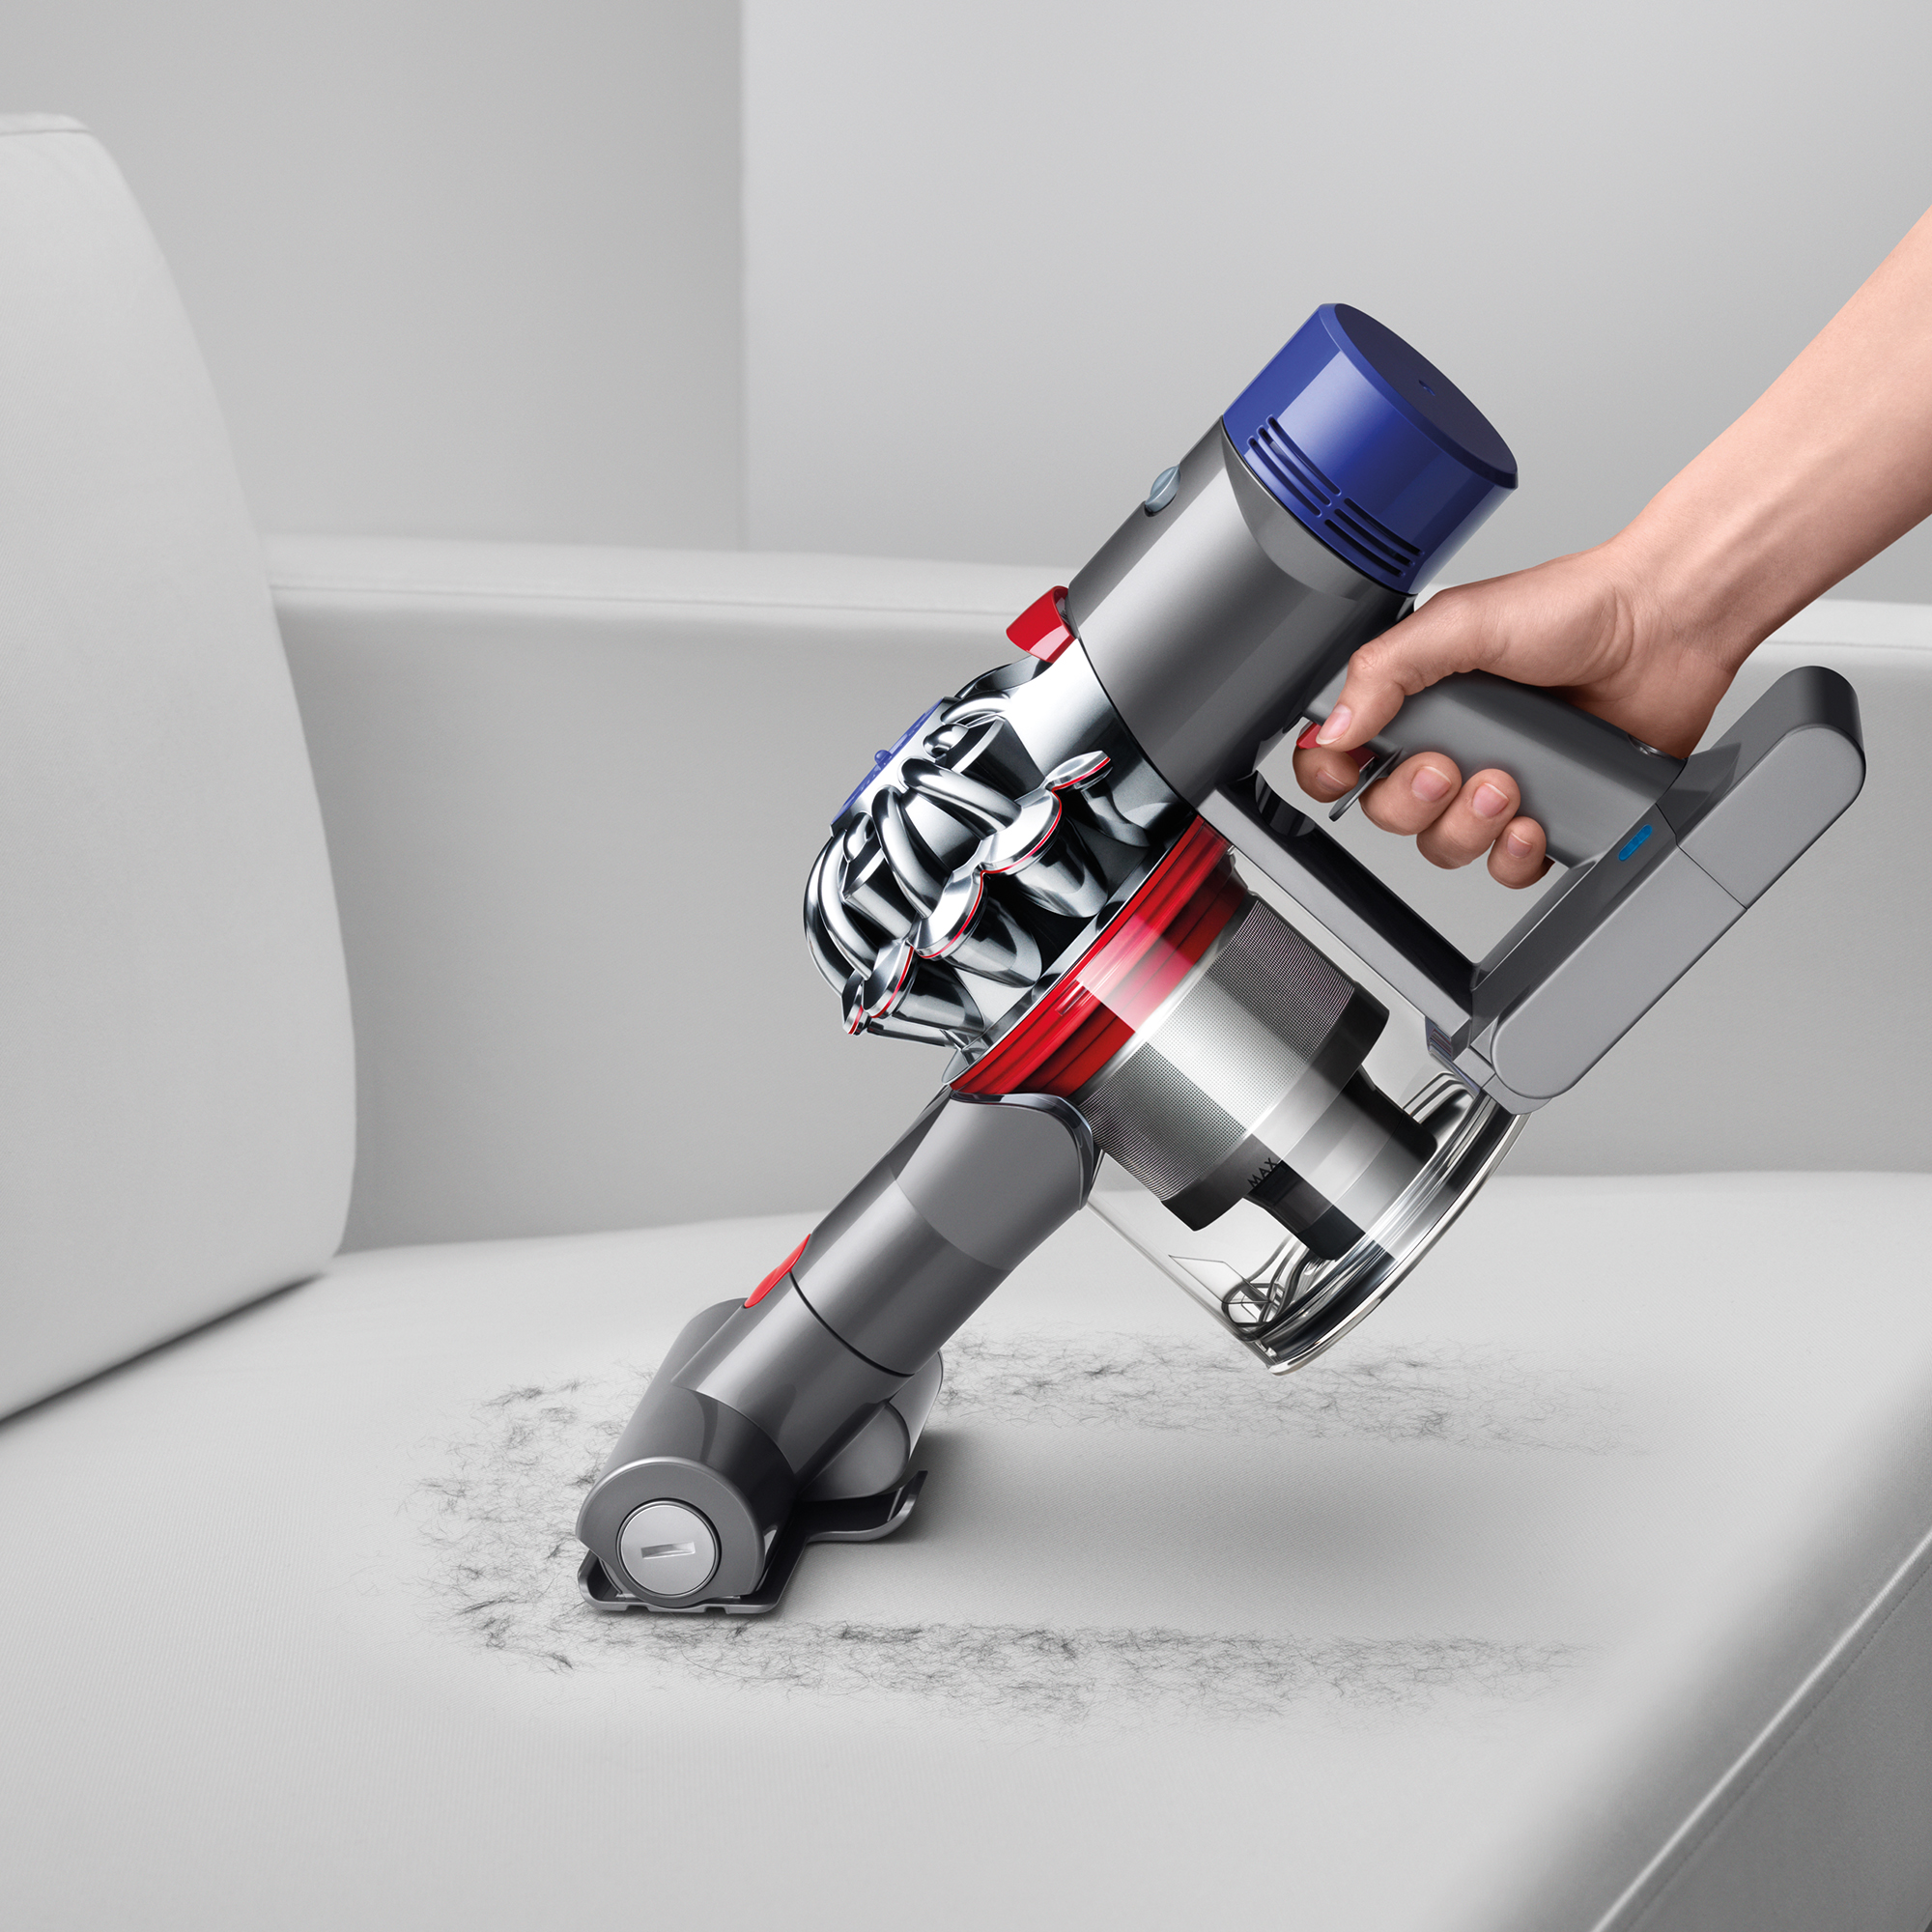 Dyson - V8 Absolute Display Model - image 5 of 6